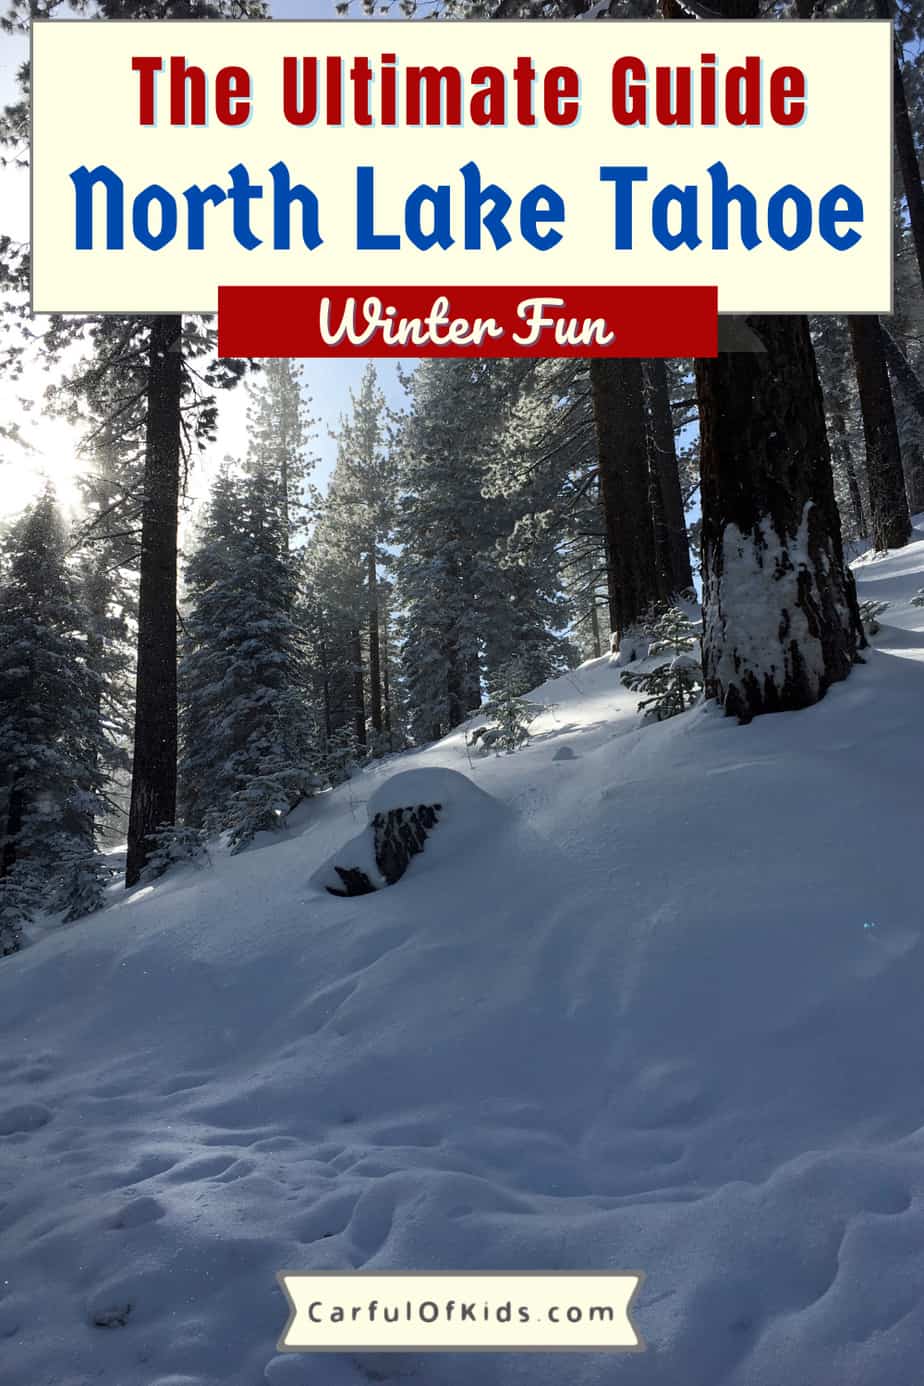 The Ultimate Guide to North Lake Tahoe from where to ski and snowboard to where to sled. Looking for apres fun, here's where to eat along with indoor entertainment. Find ice skating, snowshoeing, snowmobile tours and horse-drawn carriages too. Where to ski in Lake Tahoe | Where to stay at Lake Tahoe | Snow Day fun at Lake Tahoe 